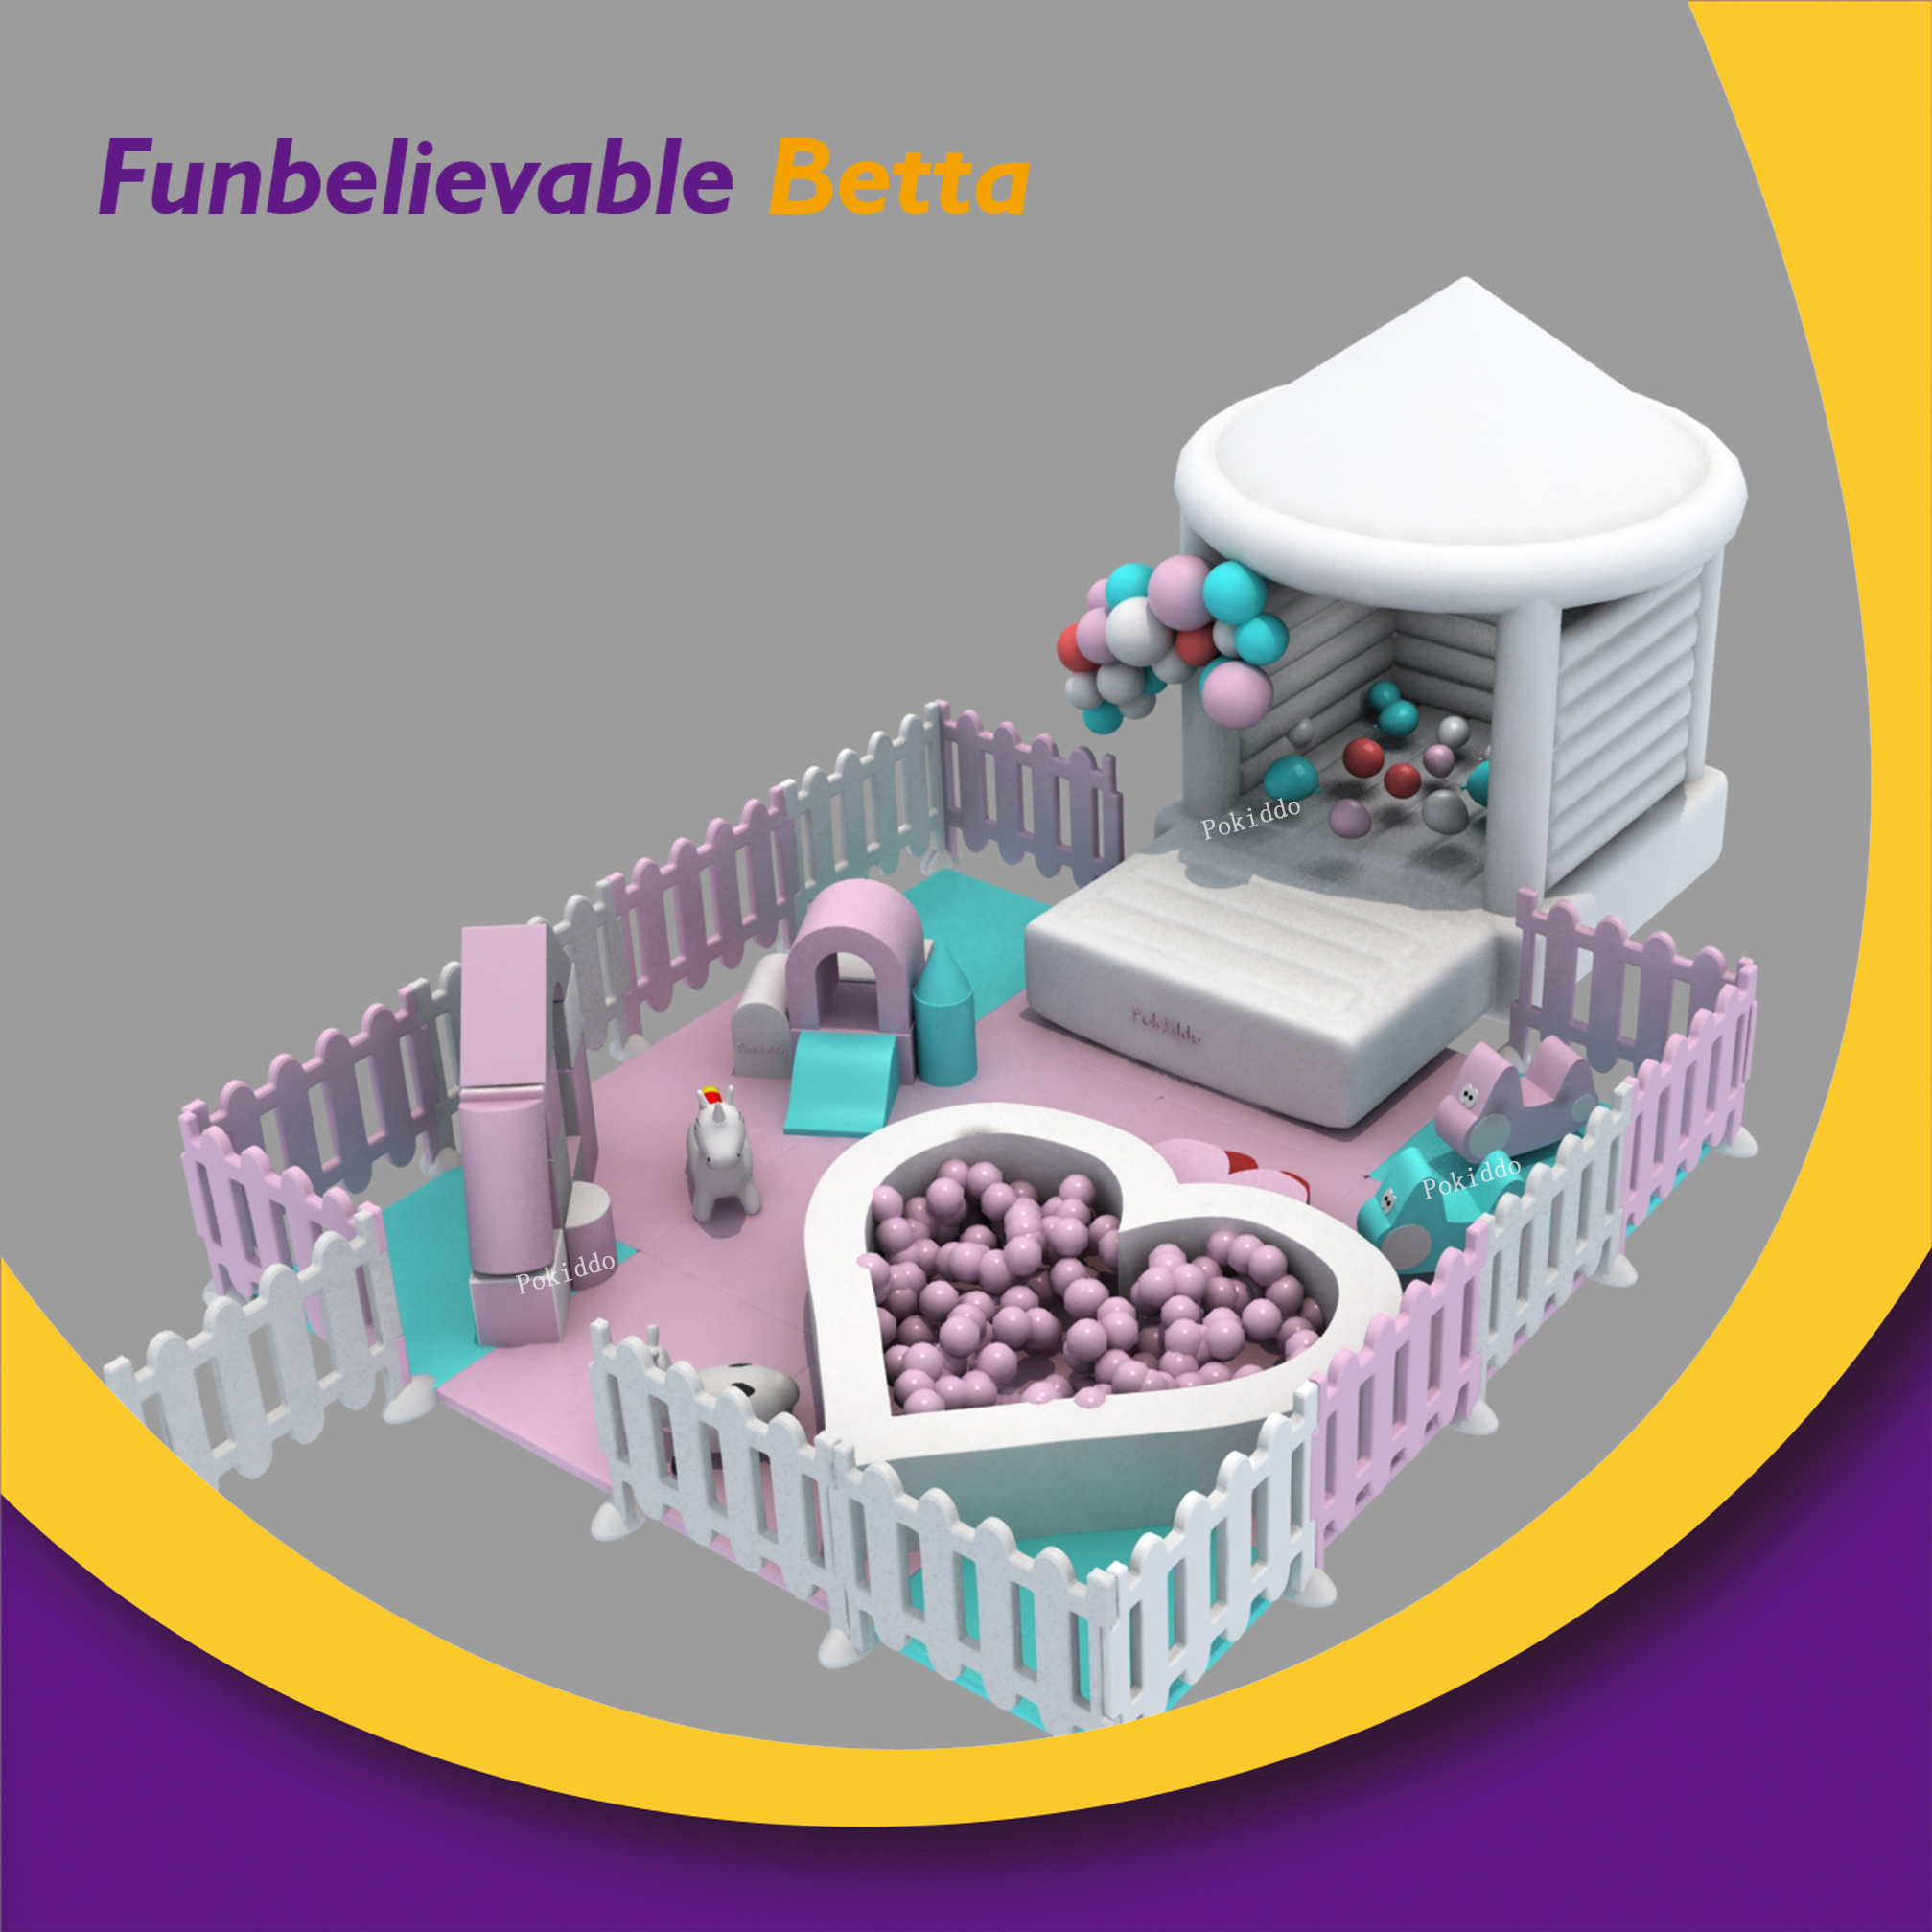 Bettaplay soft play equipment customized Soft play package with ball pool for kids - COPY - COPY